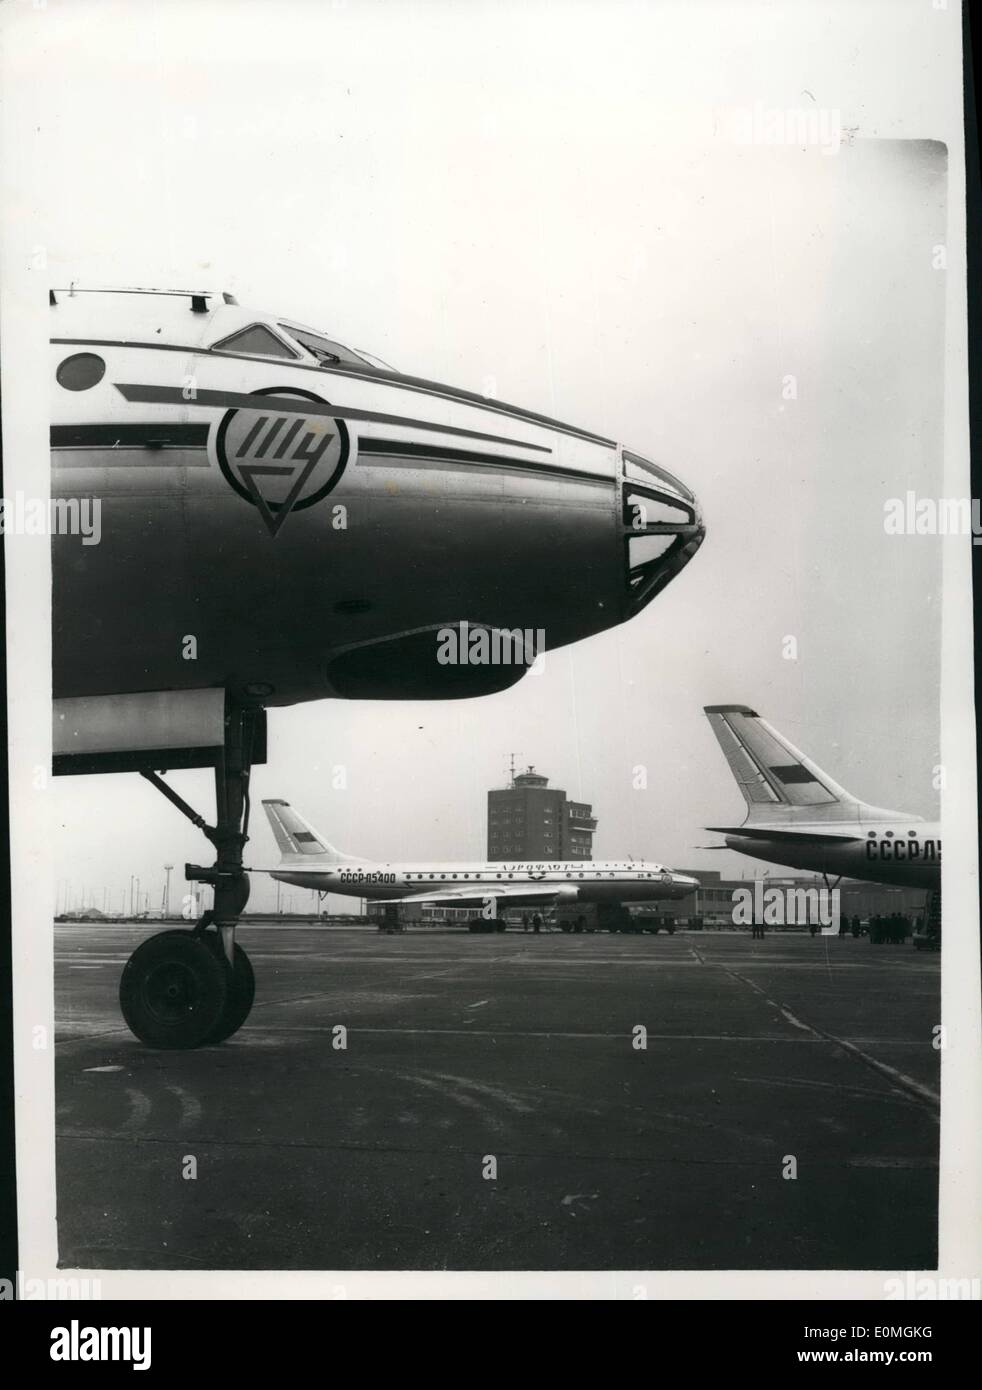 Apr. 04, 1955 - Soviet jet airliners at London airport. Three Sewist Tul104 Jet airliners. two of which arrived today- and one yesterday - were to be seen today at London airport. photo shows one of the Soviet airliners is seen framed beneath the nose to another at London airport today. Stock Photo